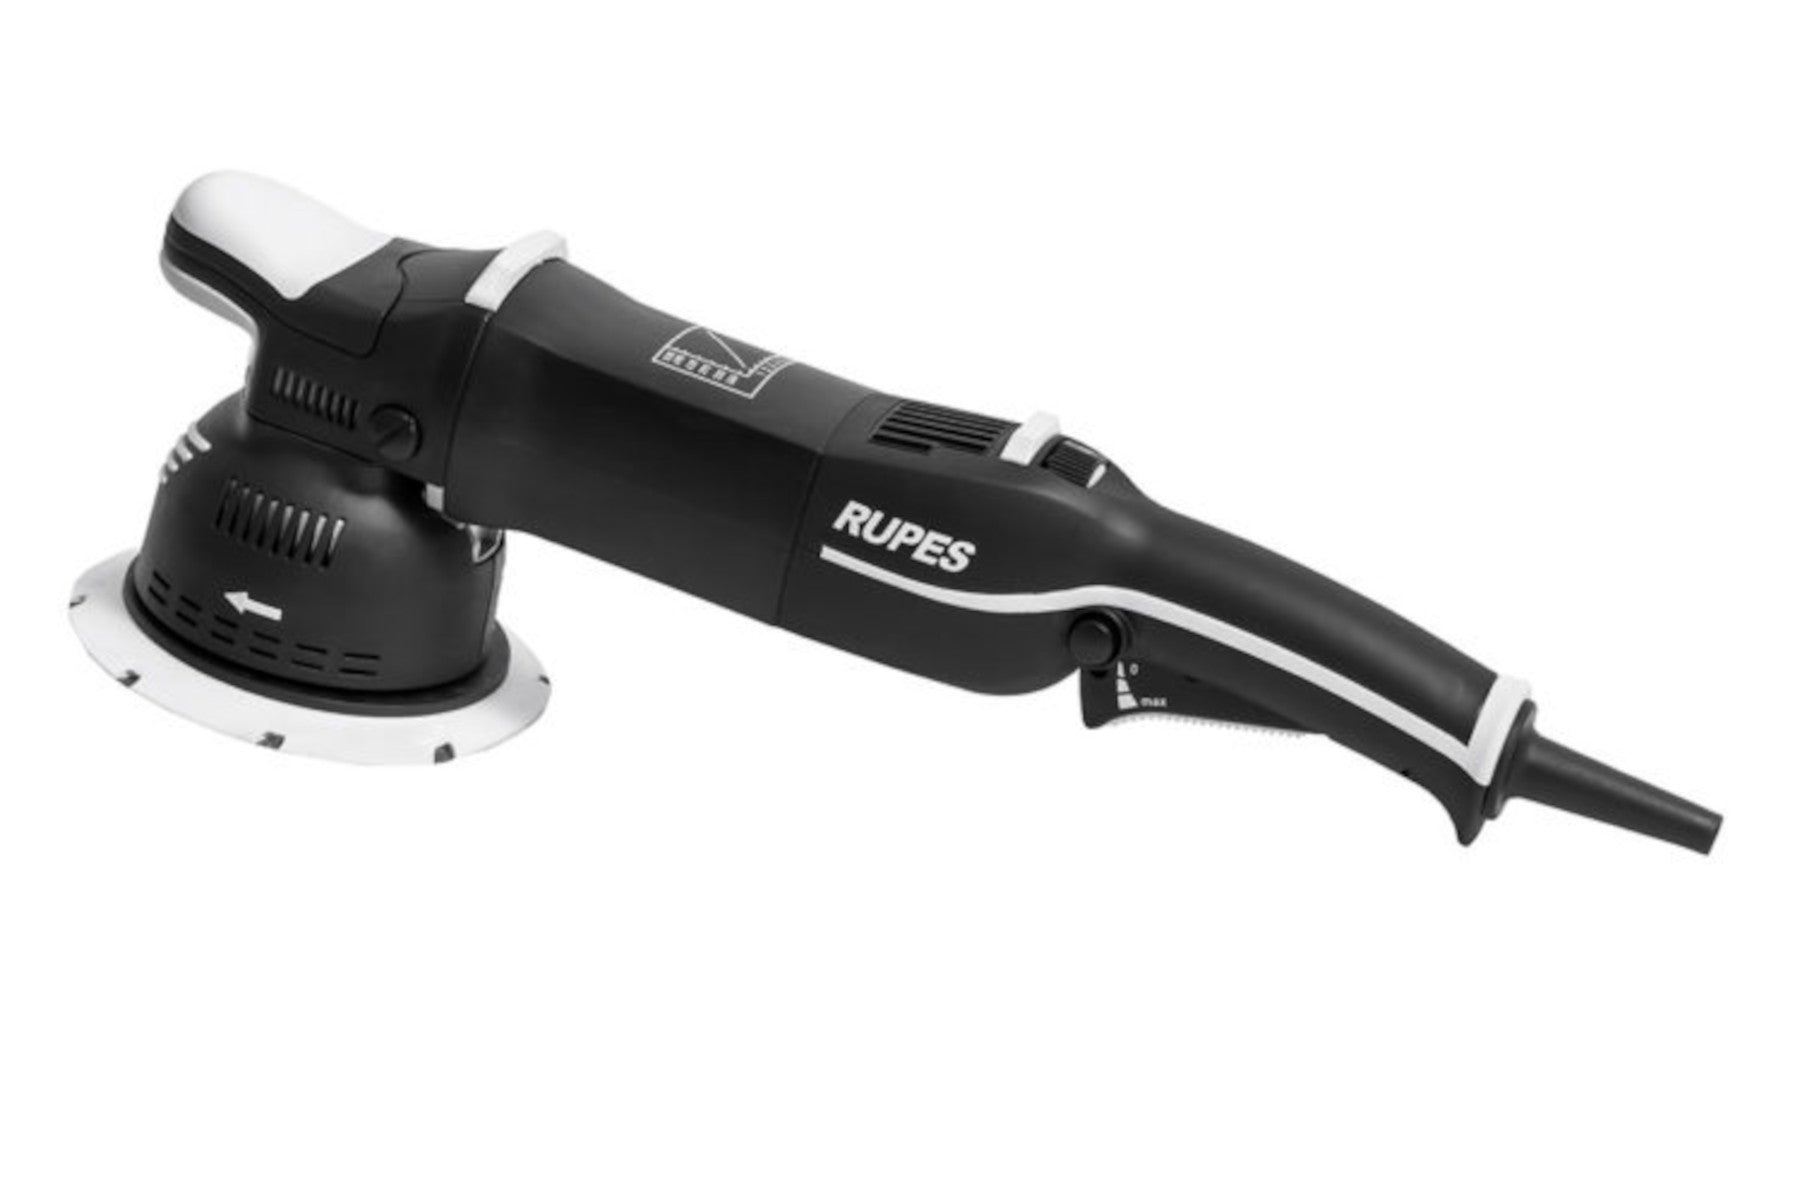 RUPES Gear Driven Dual Action Polisher – BIGFOOT Mille LK900E